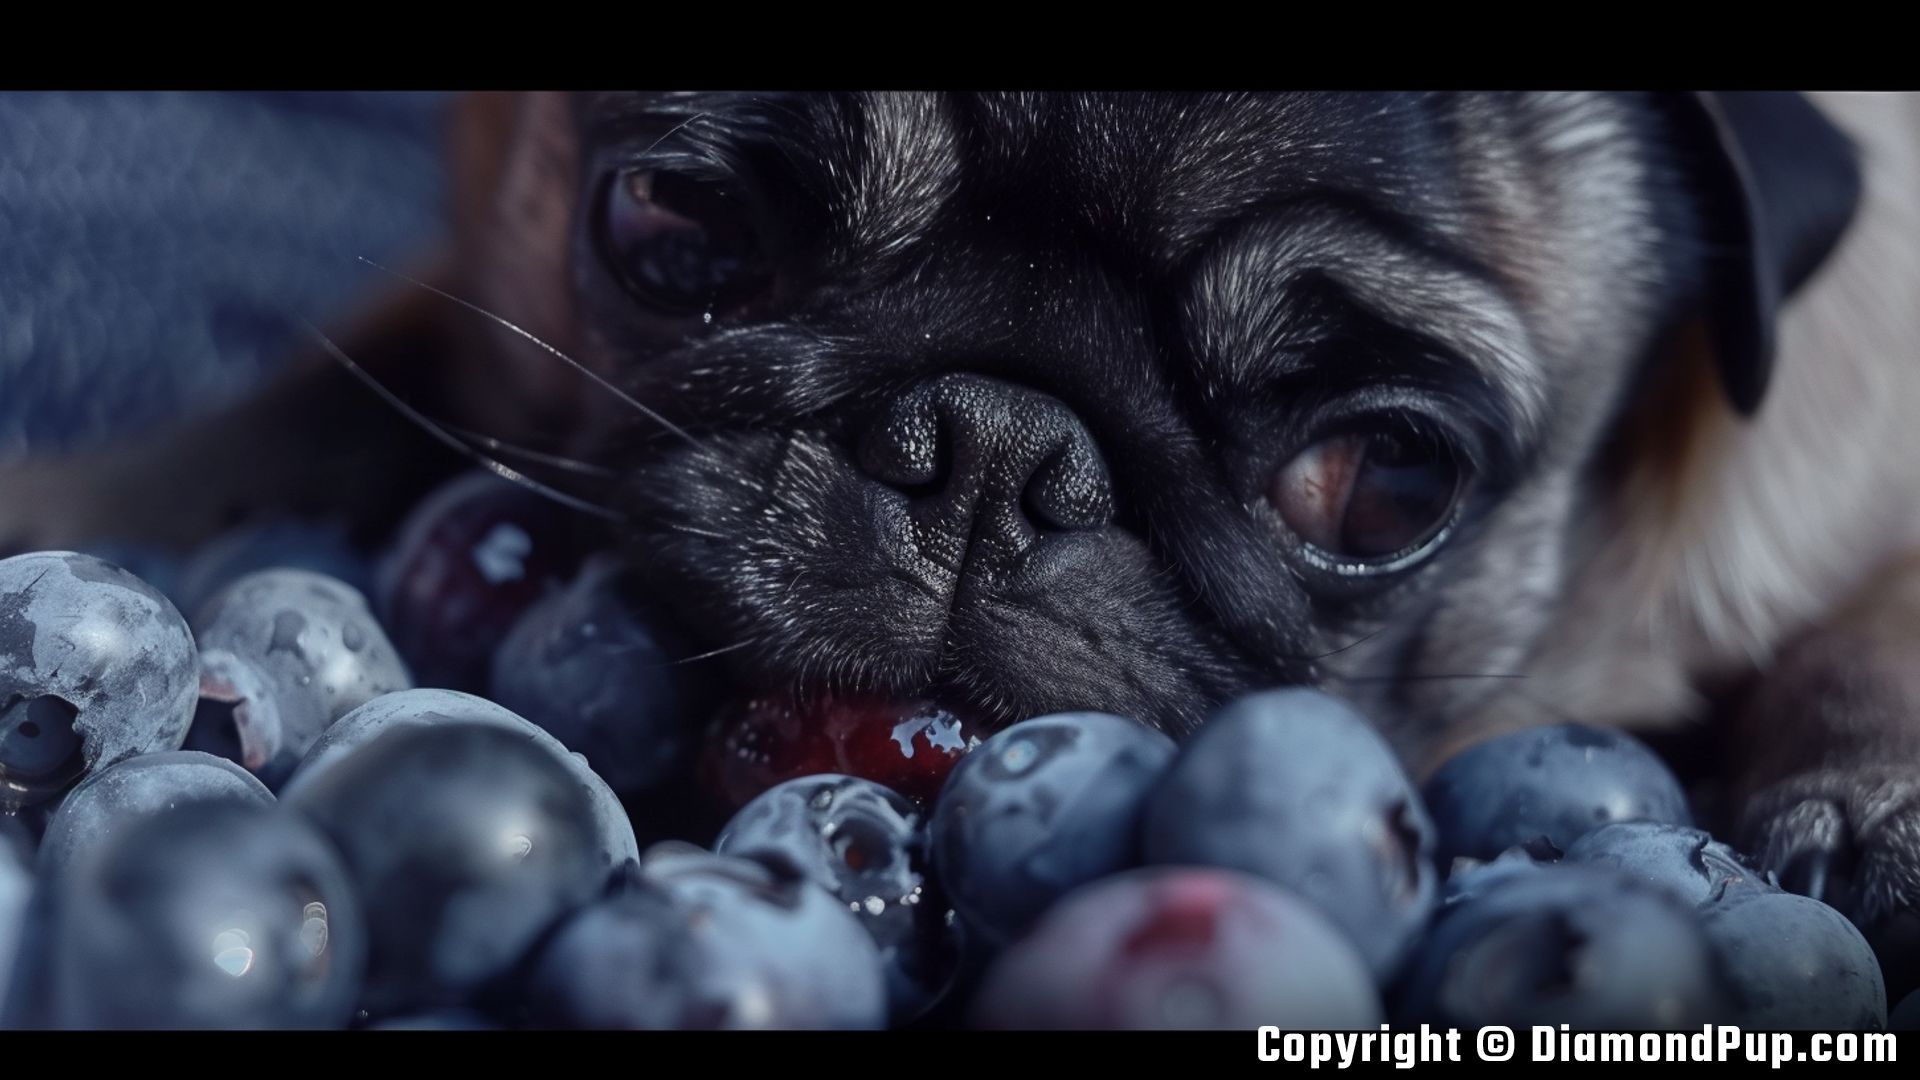 Photograph of an Adorable Pug Eating Blueberries